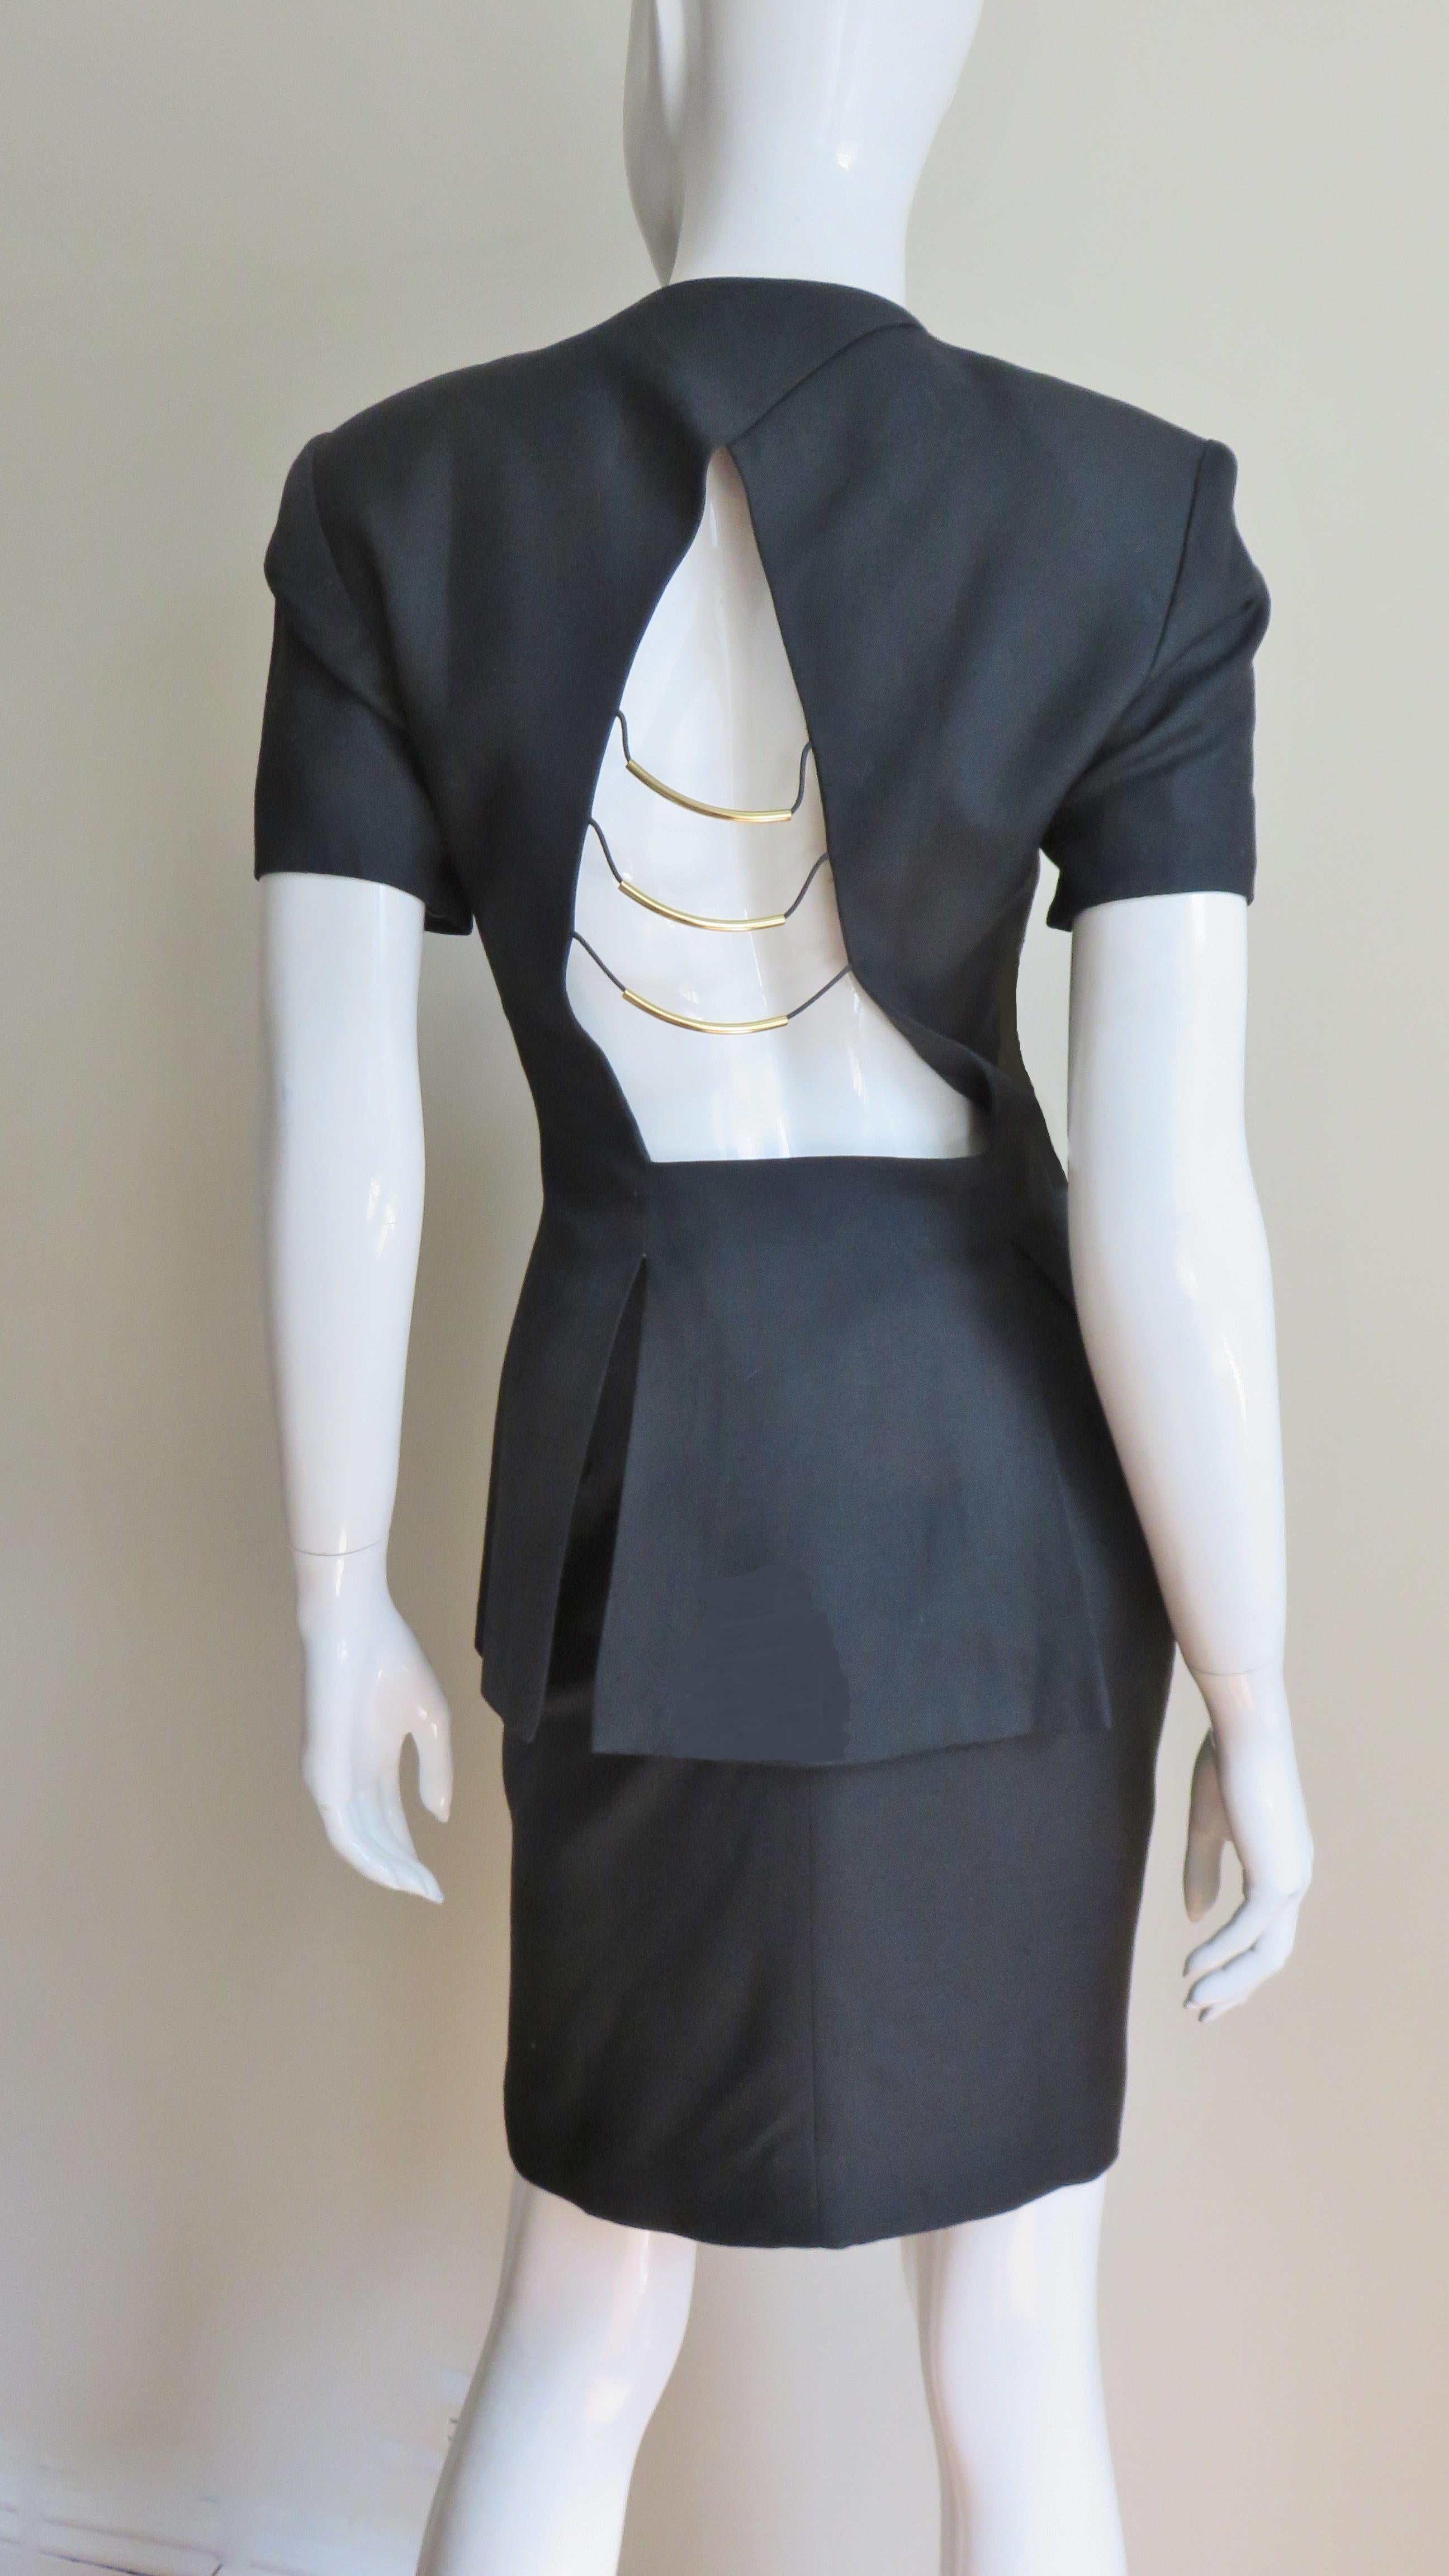 A fabulous black silk linen skirt suit from Gianfranco Ferre consisting of a simple straight skirt and a single breasted, collarless, short sleeve jacket.  The jacket has a large back cut out from below the neck to the waist with gold metal beading